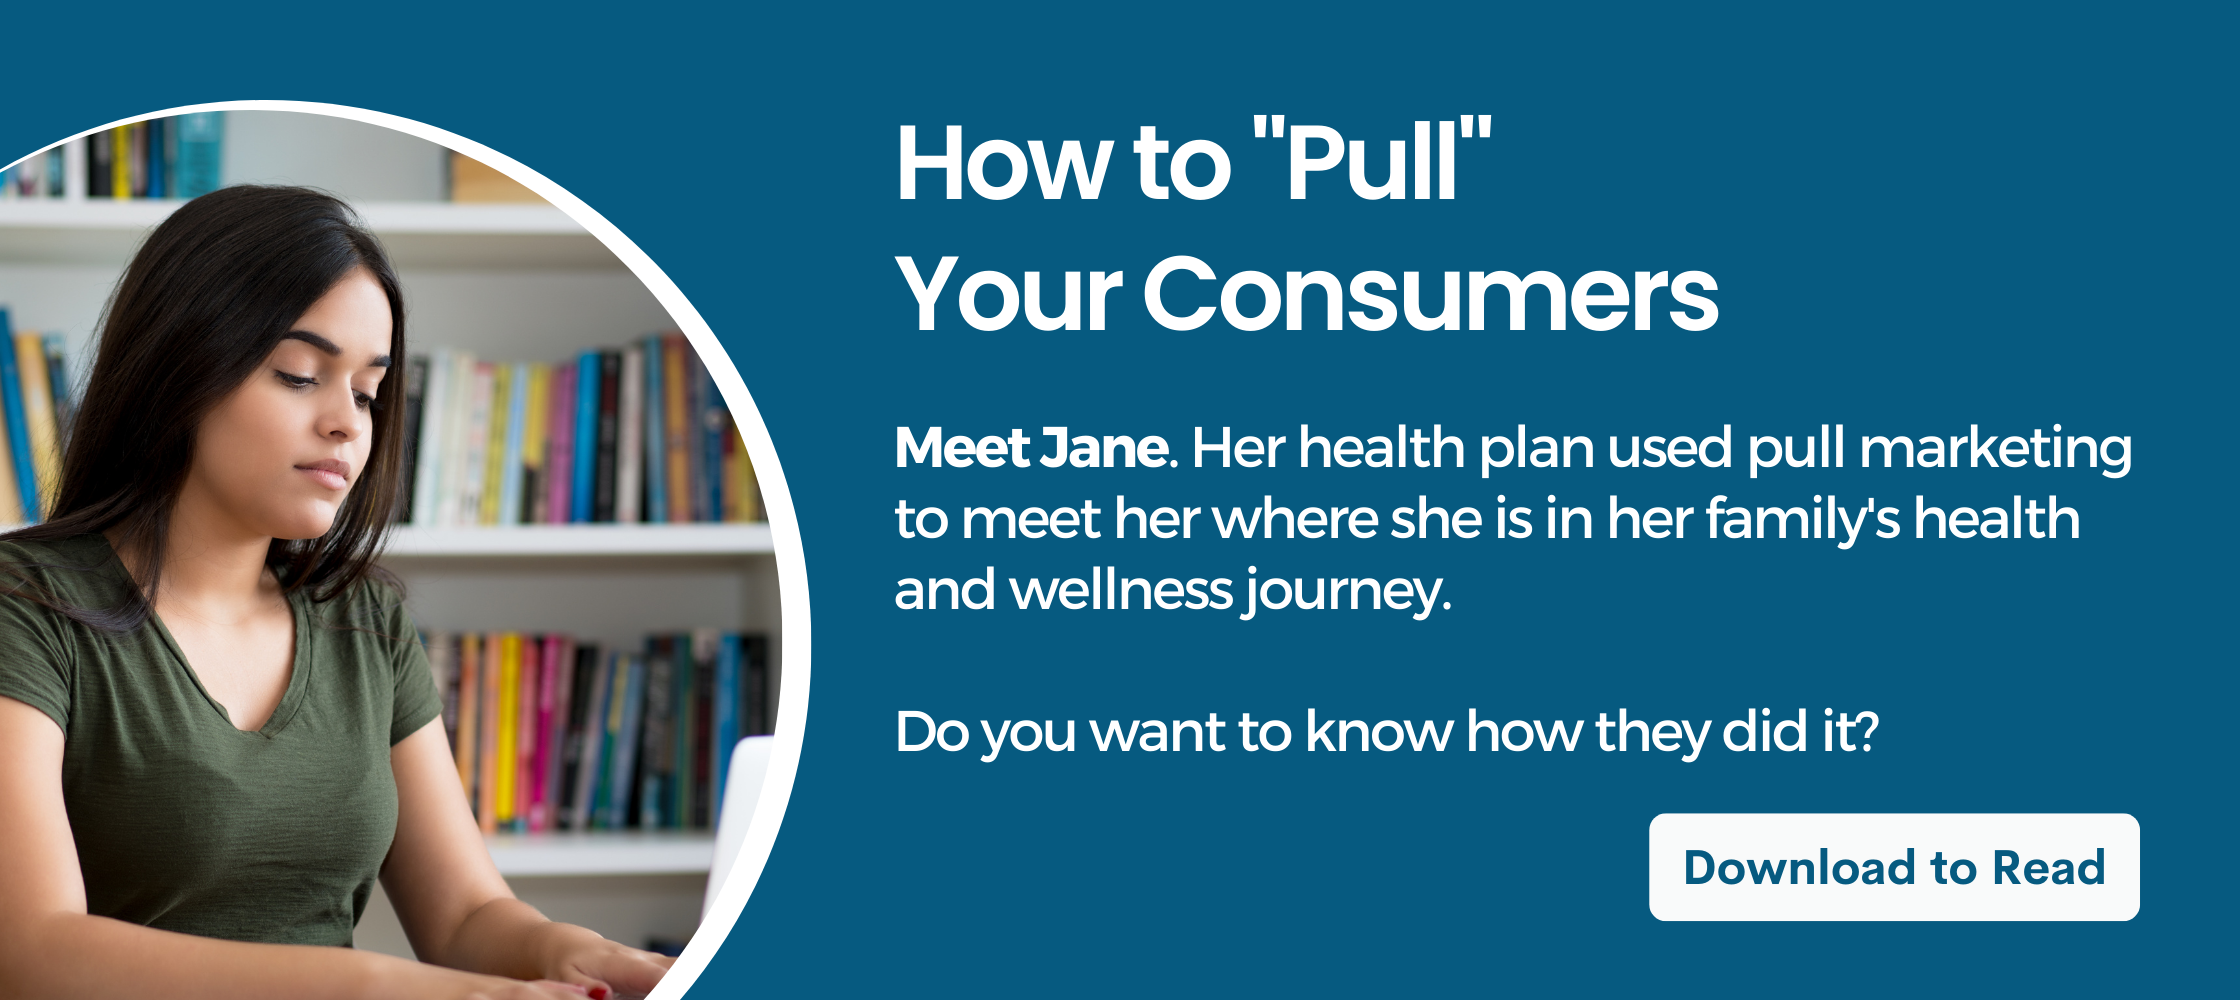 Click this image to go to a form. This form will provide you with a PDF that explains a journey that a consumer experienced with her health plan, who used a pull strategy to communicate and educate her.